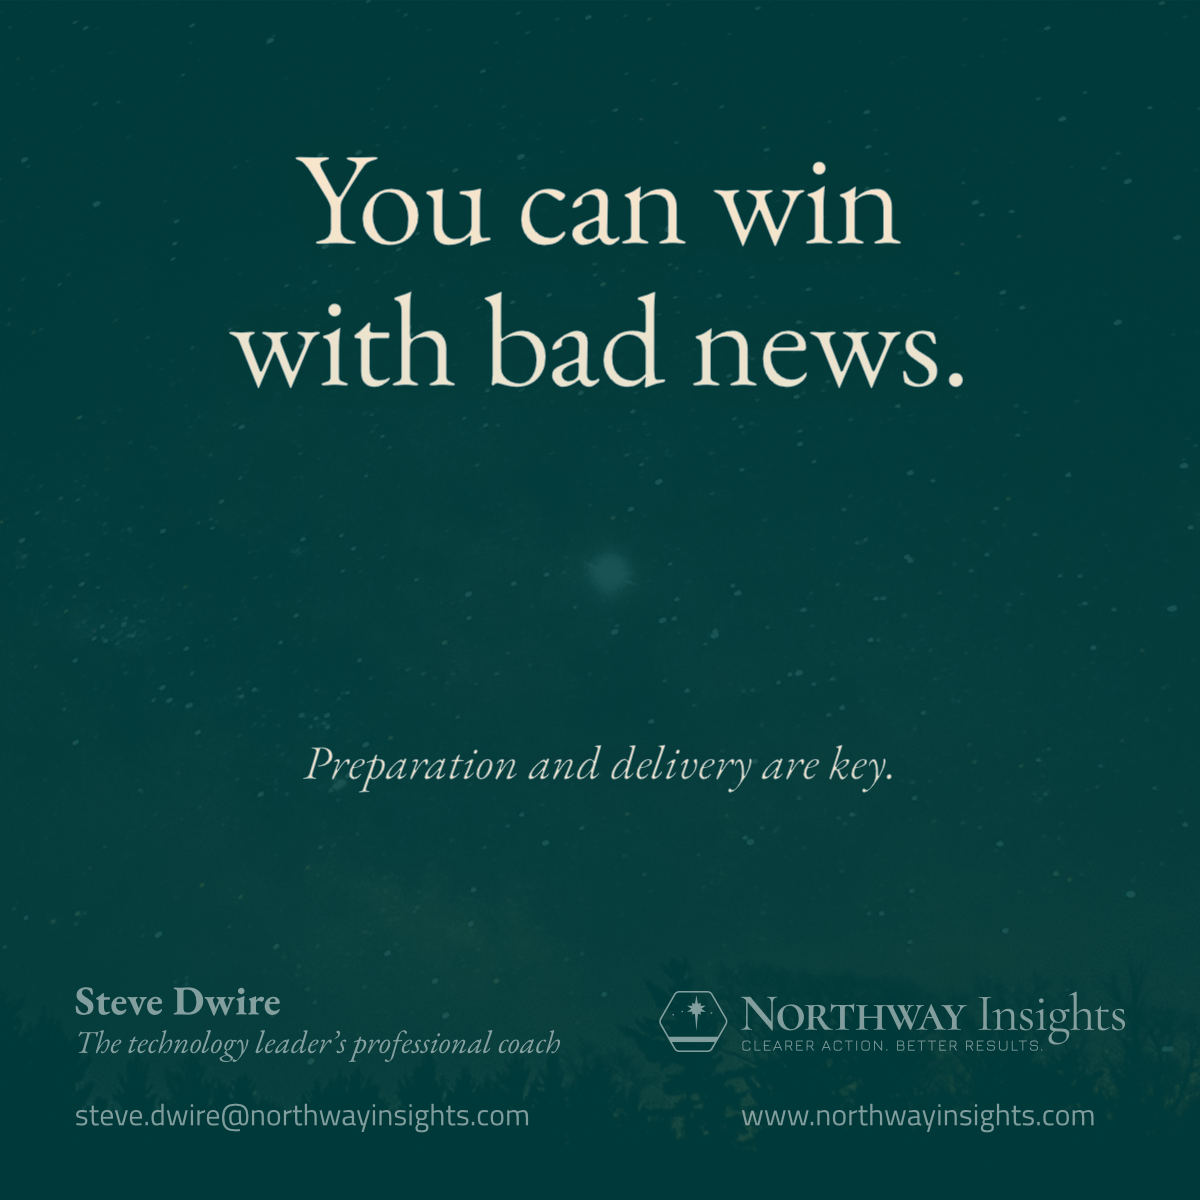 You can win with bad news. (Preparation and delivery are key.)